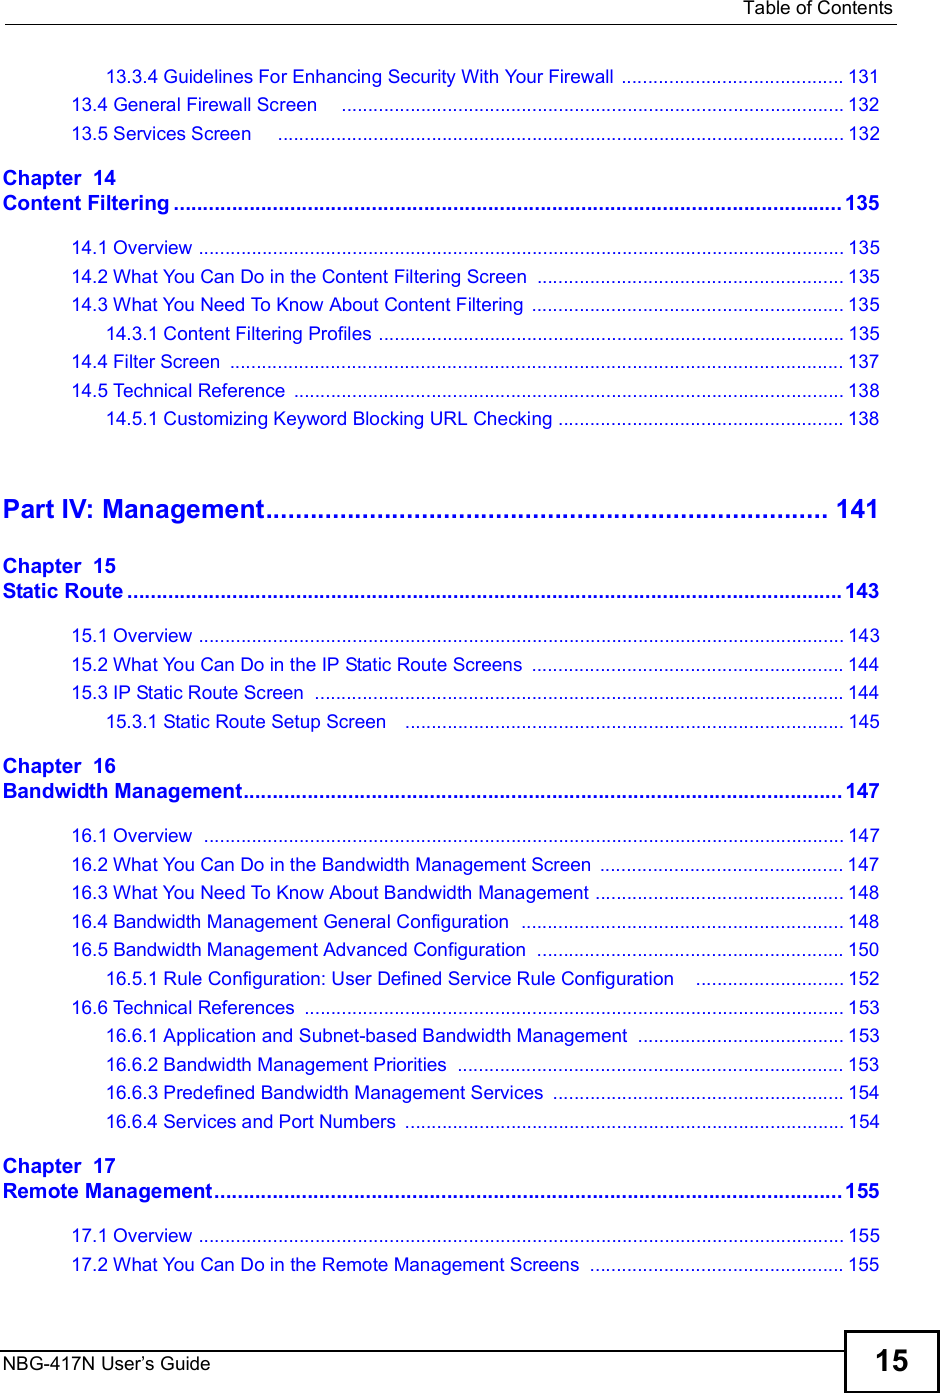  Table of ContentsNBG-417N User s Guide 1513.3.4 Guidelines For Enhancing Security With Your Firewall ..........................................13113.4 General Firewall Screen    ...............................................................................................13213.5 Services Screen    ...........................................................................................................132Chapter  14Content Filtering...................................................................................................................13514.1 Overview ..........................................................................................................................13514.2 What You Can Do in the Content Filtering Screen ..........................................................13514.3 What You Need To Know About Content Filtering ...........................................................13514.3.1 Content Filtering Profiles ........................................................................................13514.4 Filter Screen ....................................................................................................................13714.5 Technical Reference ........................................................................................................13814.5.1 Customizing Keyword Blocking URL Checking ......................................................138Part IV: Management............................................................................141Chapter  15Static Route...........................................................................................................................14315.1 Overview ..........................................................................................................................14315.2 What You Can Do in the IP Static Route Screens ...........................................................14415.3 IP Static Route Screen ....................................................................................................14415.3.1 Static Route Setup Screen   ...................................................................................145Chapter  16Bandwidth Management.......................................................................................................14716.1 Overview  .........................................................................................................................14716.2 What You Can Do in the Bandwidth Management Screen ..............................................14716.3 What You Need To Know About Bandwidth Management ...............................................14816.4 Bandwidth Management General Configuration  .............................................................14816.5 Bandwidth Management Advanced Configuration  ..........................................................15016.5.1 Rule Configuration: User Defined Service Rule Configuration    ............................15216.6 Technical References ......................................................................................................15316.6.1 Application and Subnet-based Bandwidth Management .......................................15316.6.2 Bandwidth Management Priorities .........................................................................15316.6.3 Predefined Bandwidth Management Services .......................................................15416.6.4 Services and Port Numbers ...................................................................................154Chapter  17Remote Management............................................................................................................15517.1 Overview ..........................................................................................................................15517.2 What You Can Do in the Remote Management Screens ................................................155